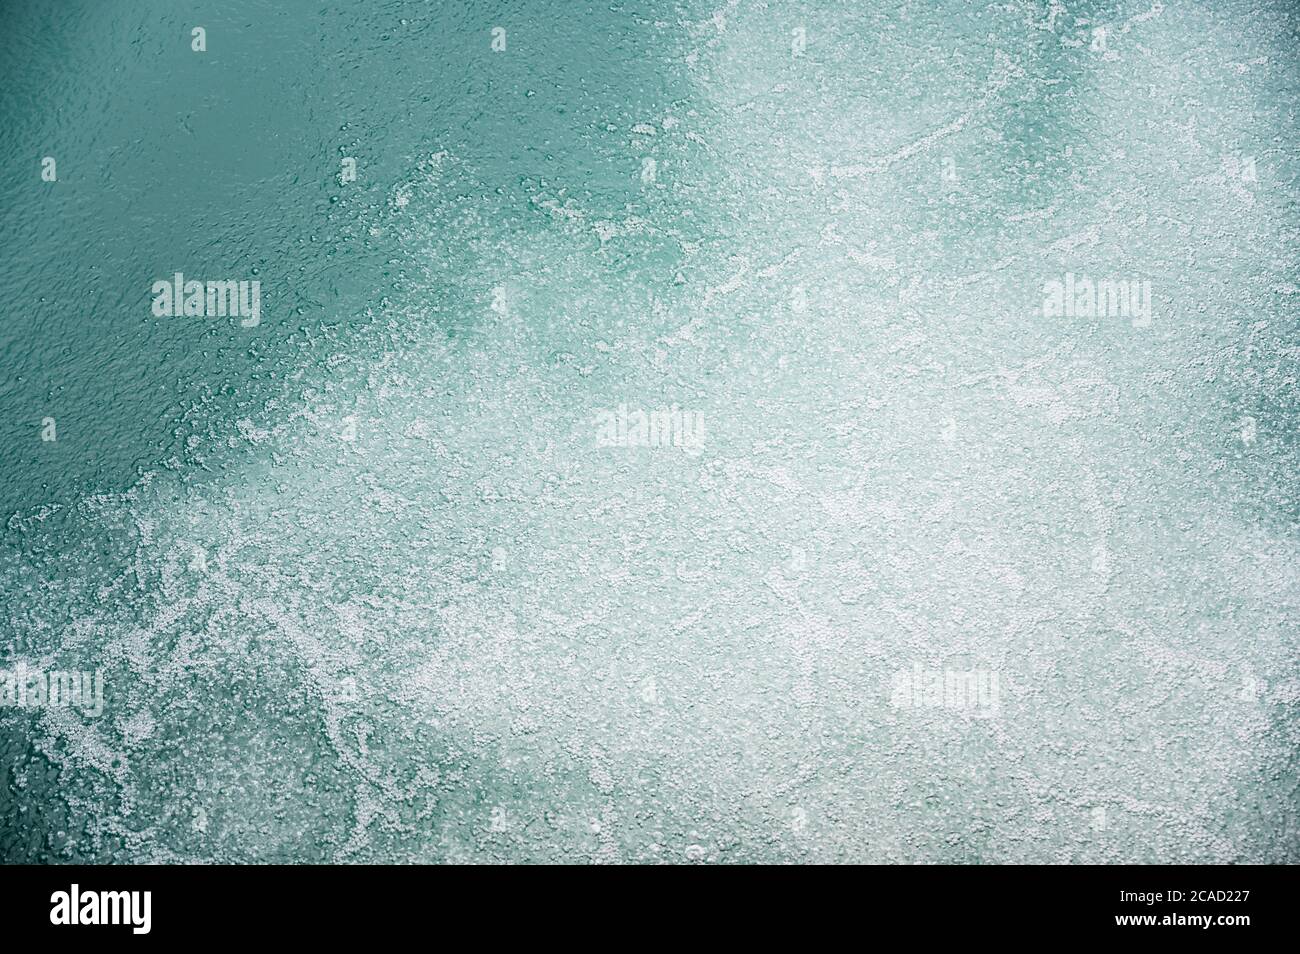 white air bubbles in turquoise water of Lake Brienz Stock Photo